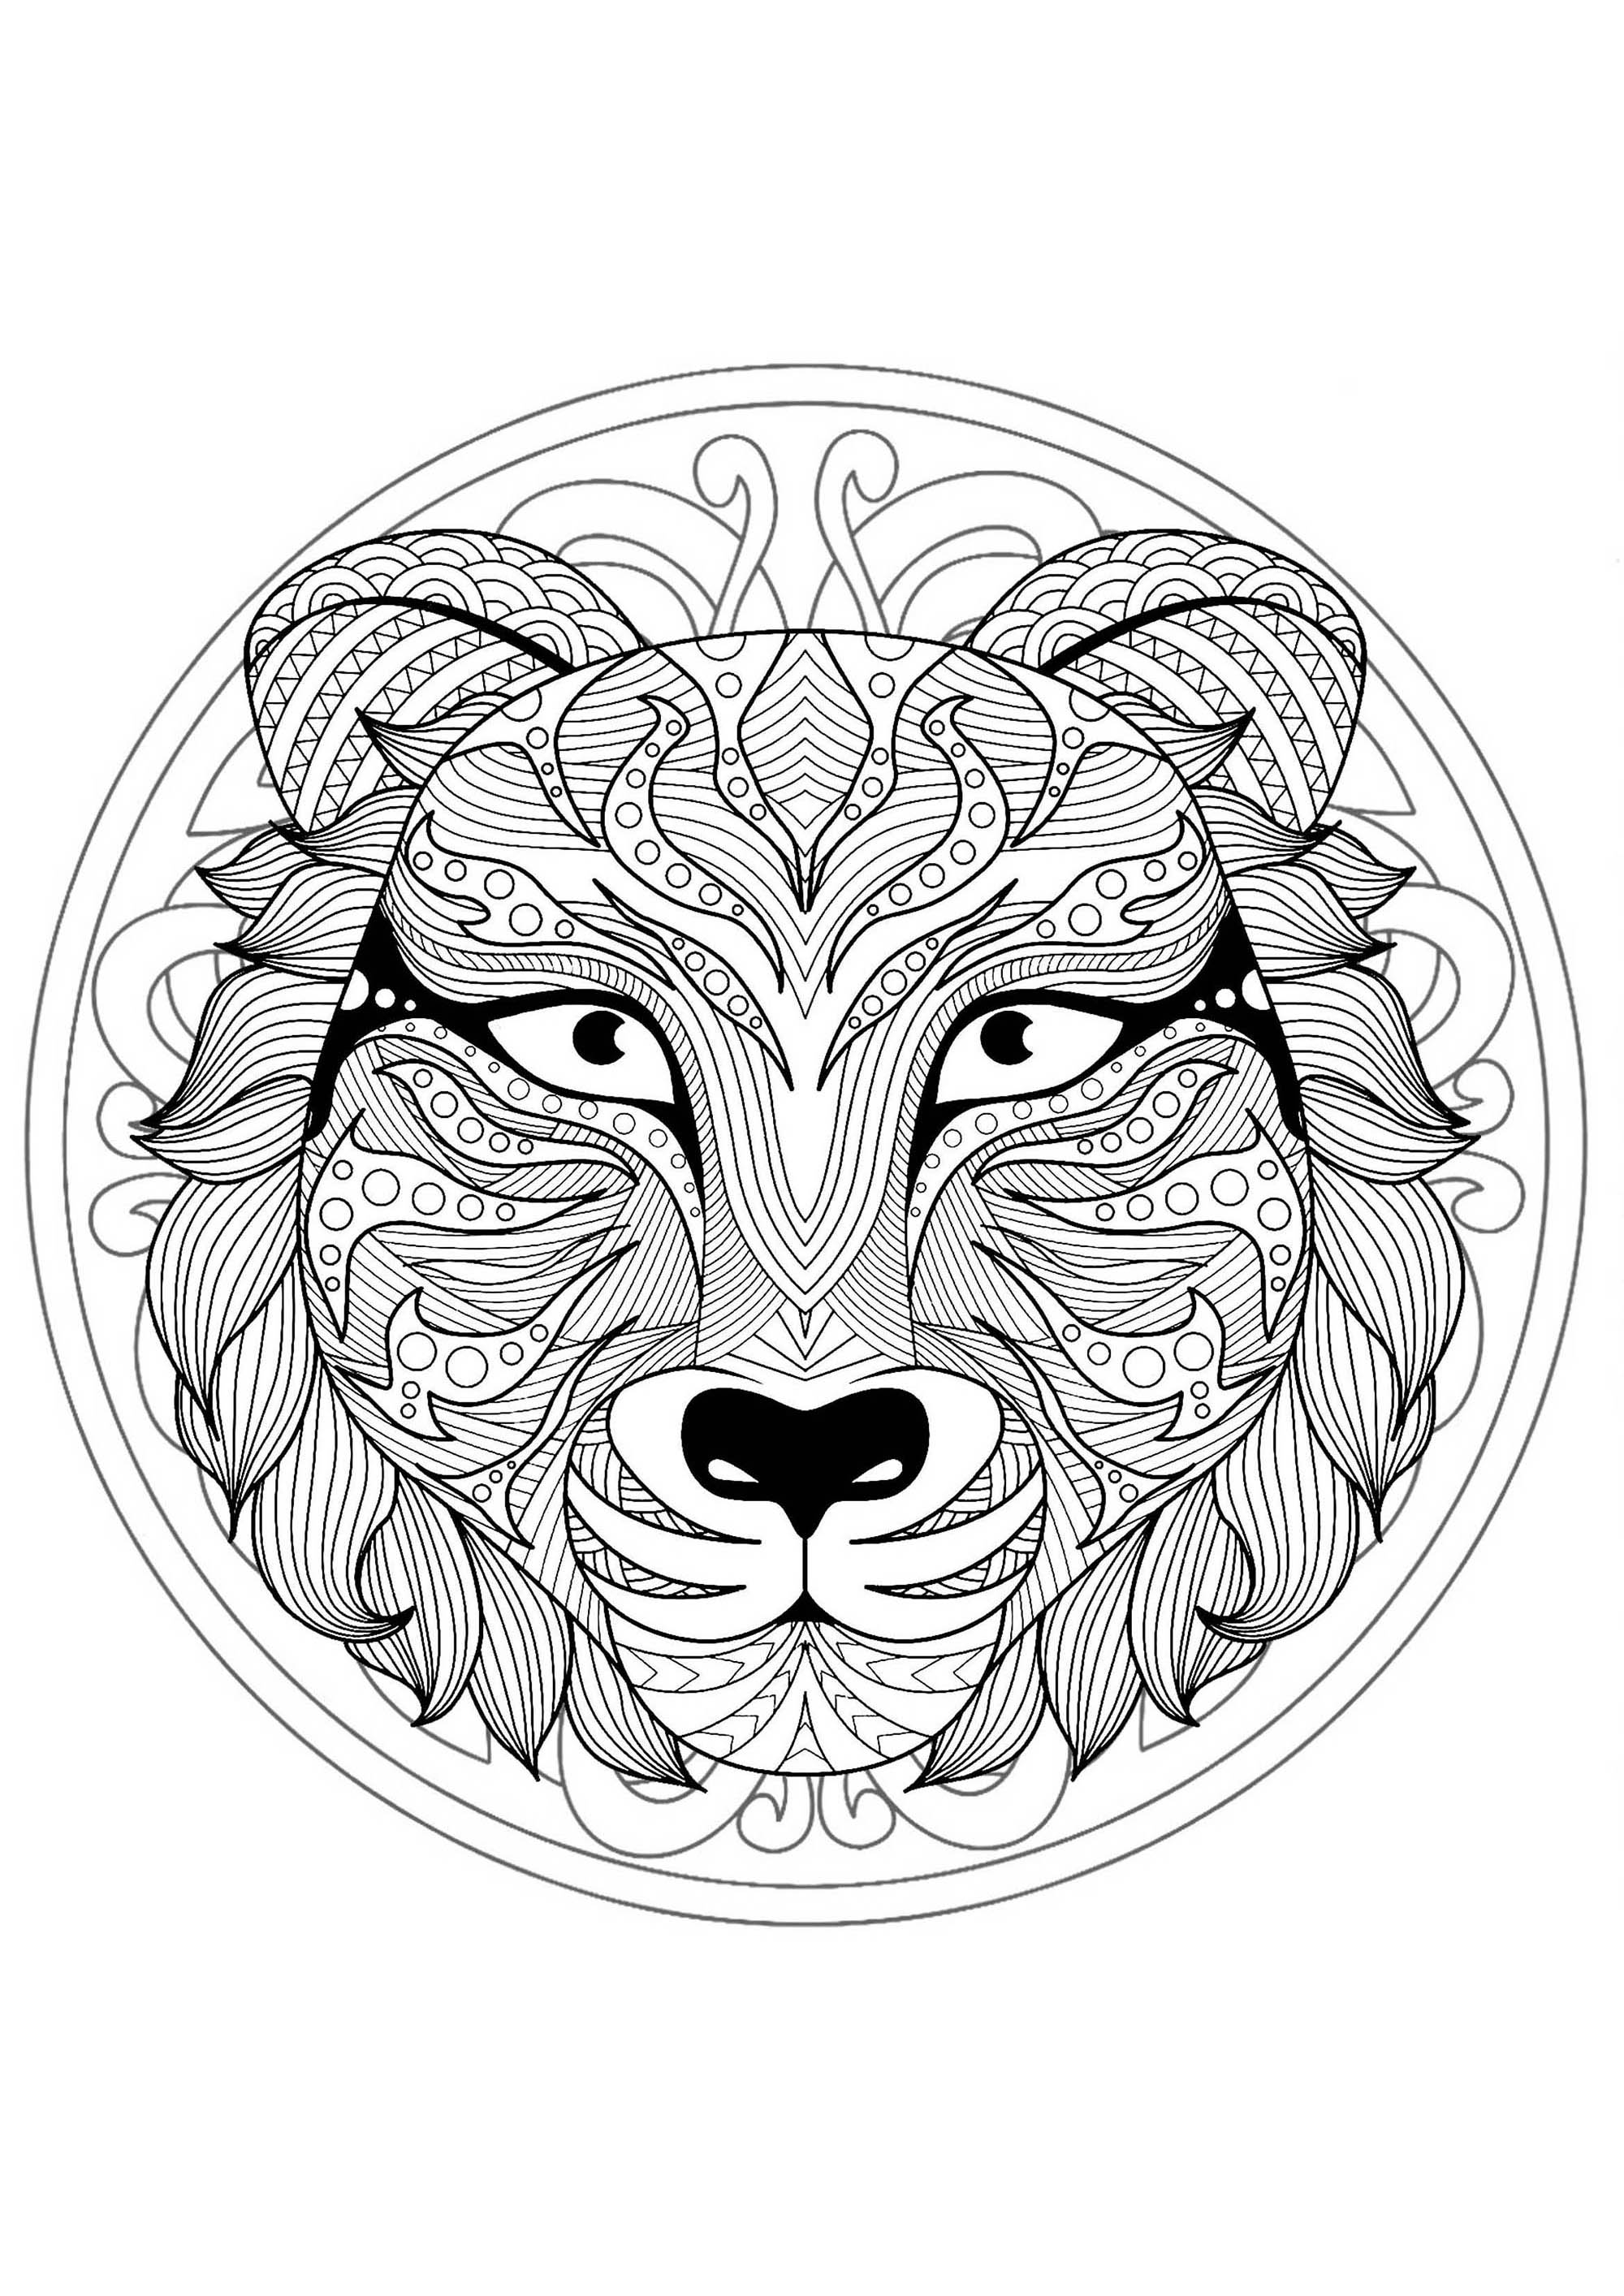 Mandala to color with very gorgeous Tiger head and beautiful interlaced patterns in background